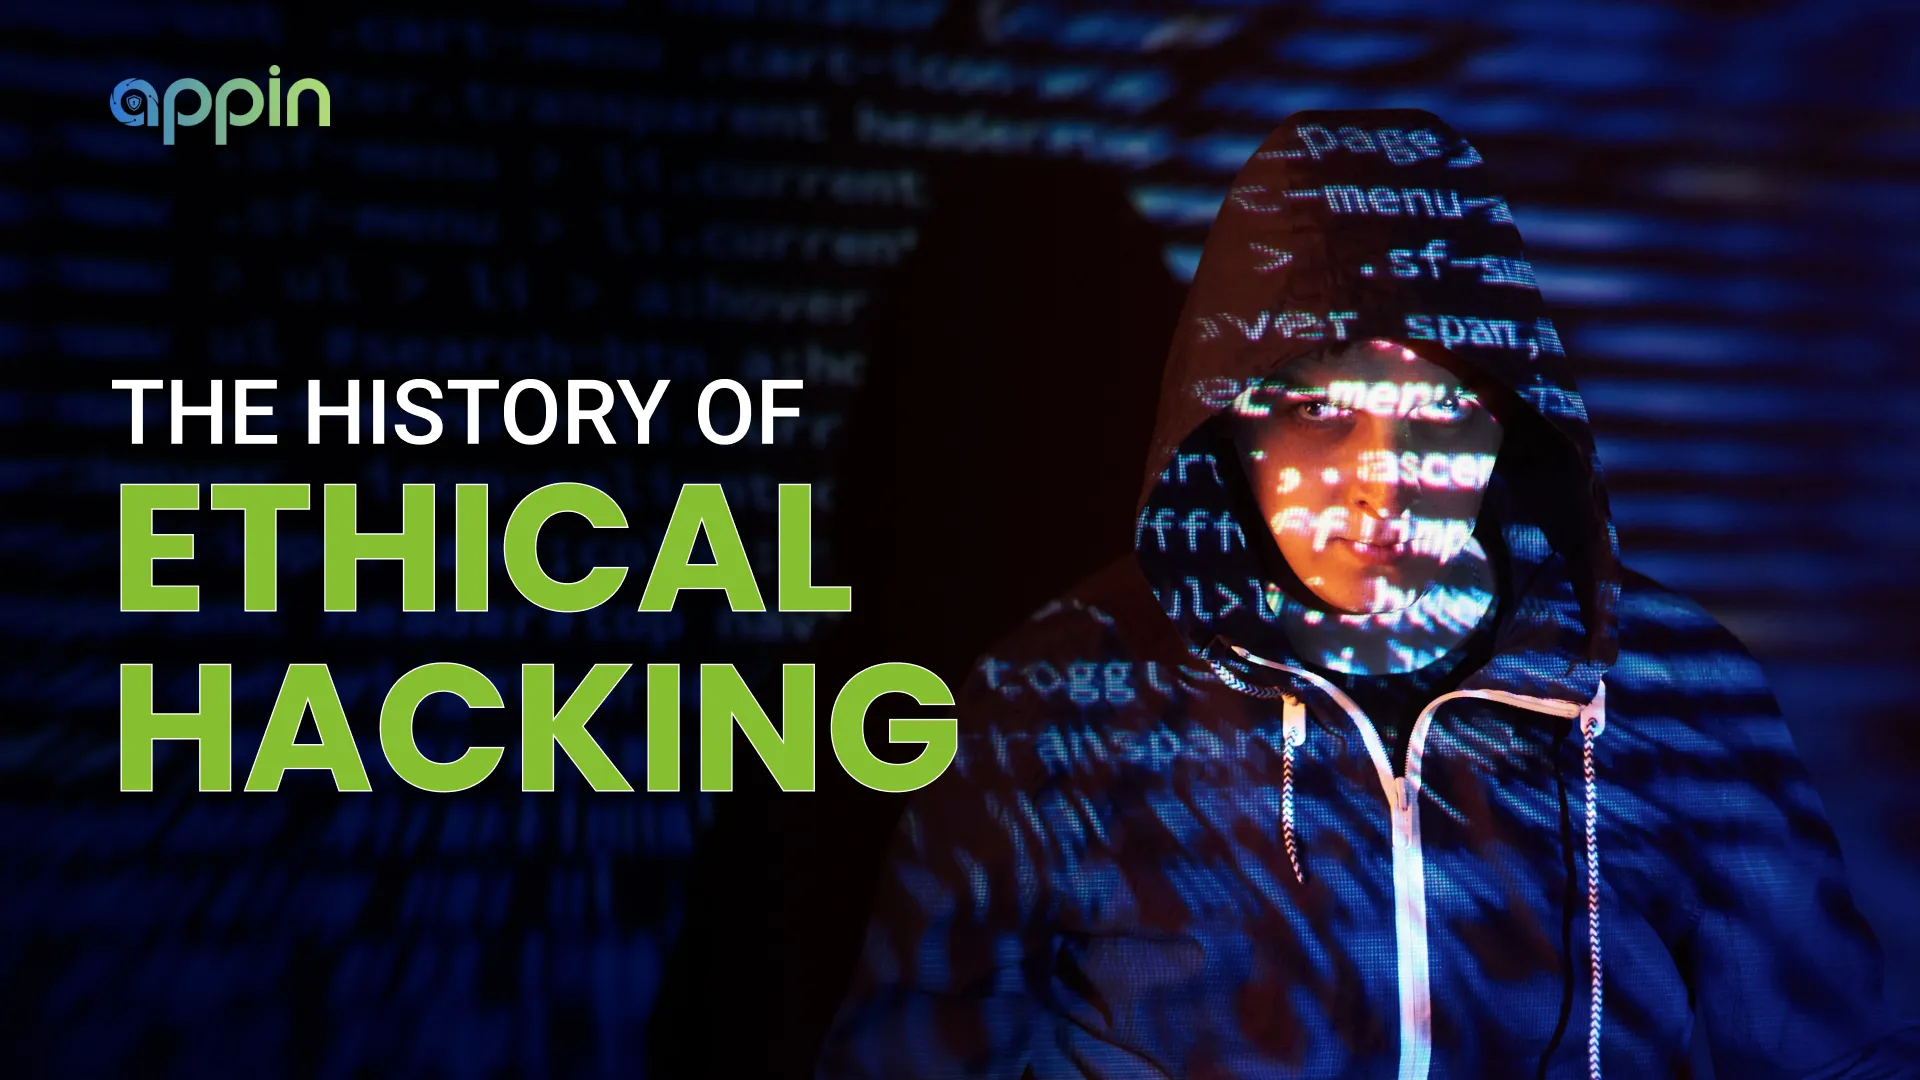 The history of ethical hacking